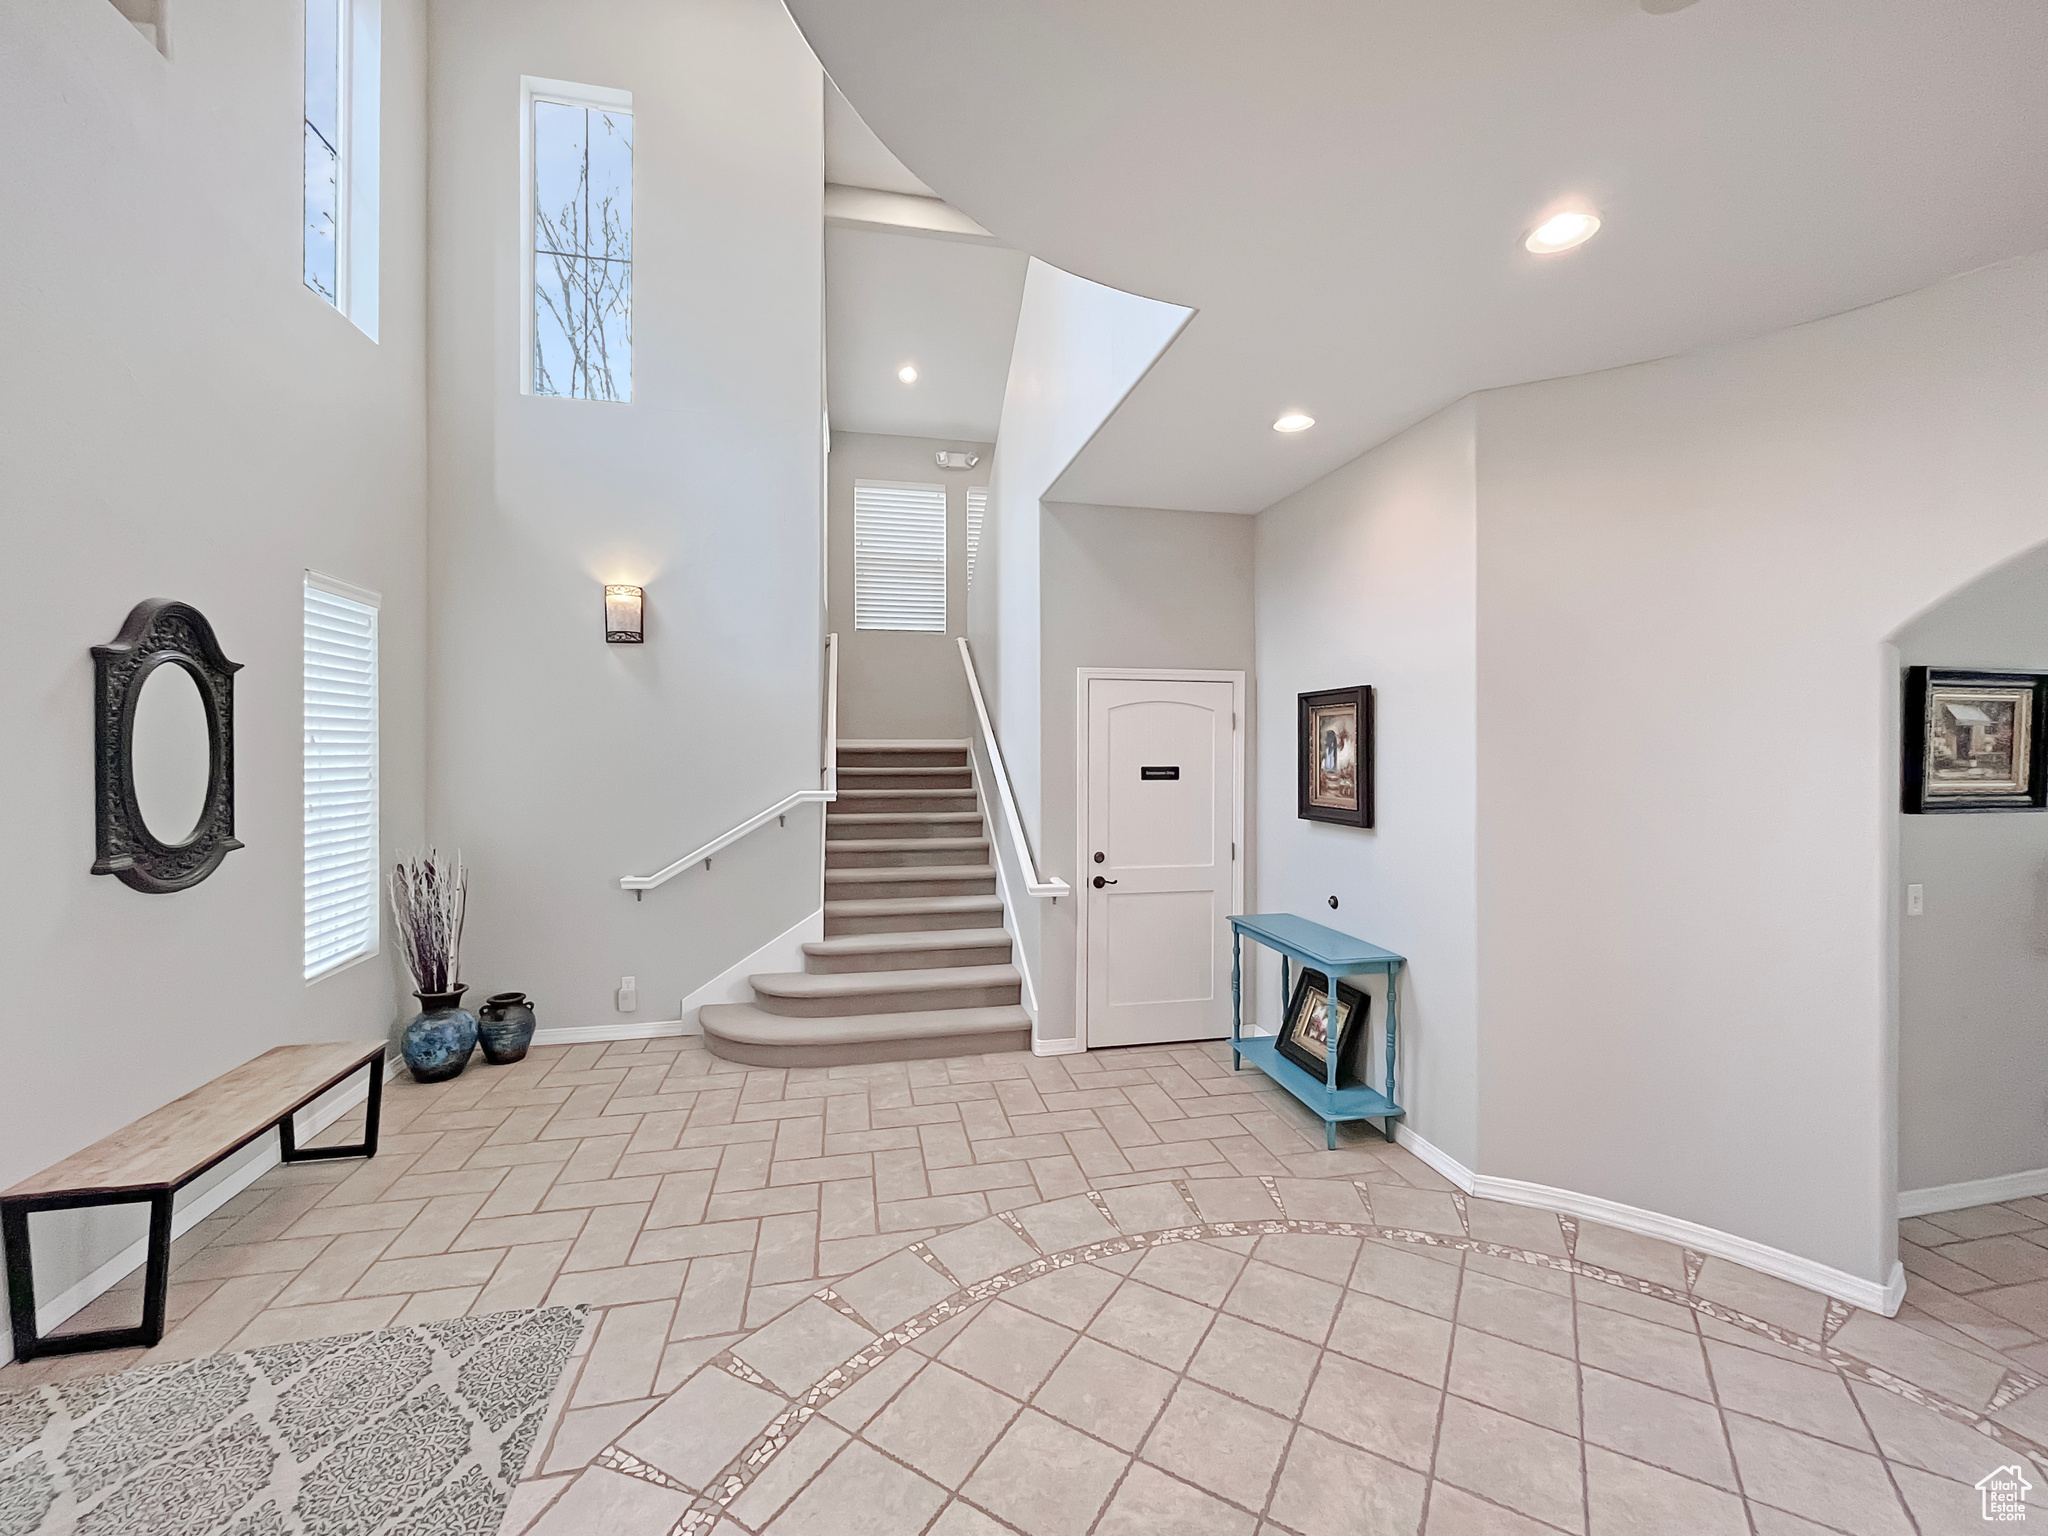 Beautiful community center entrance foyer with beautiful tile flooring and towering ceilings